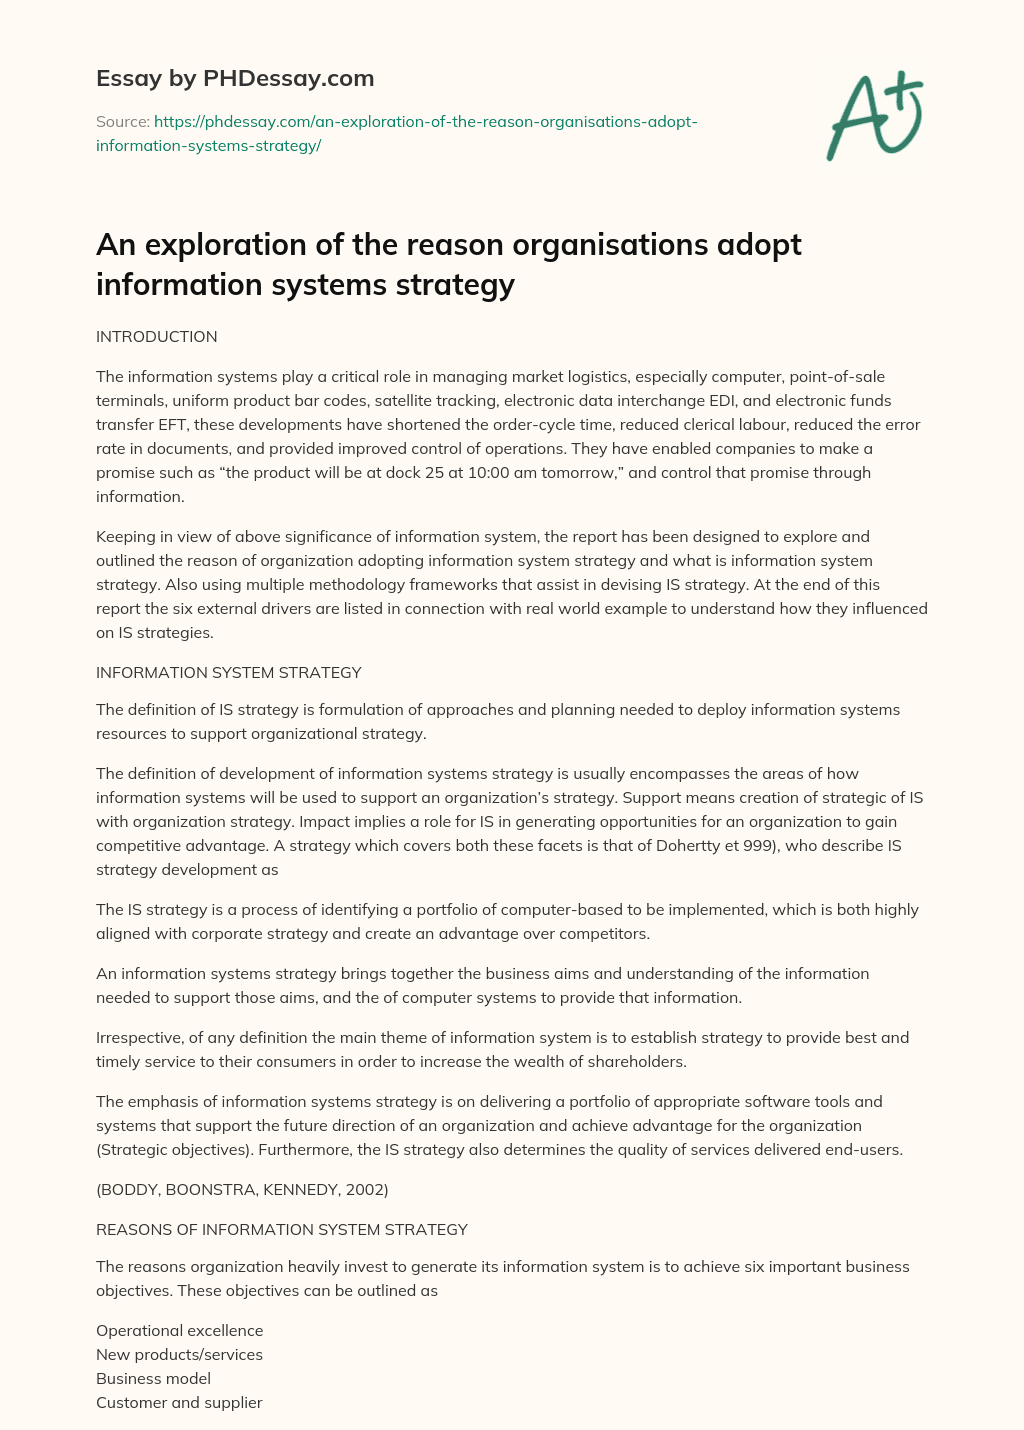 An exploration of the reason organisations adopt information systems strategy essay